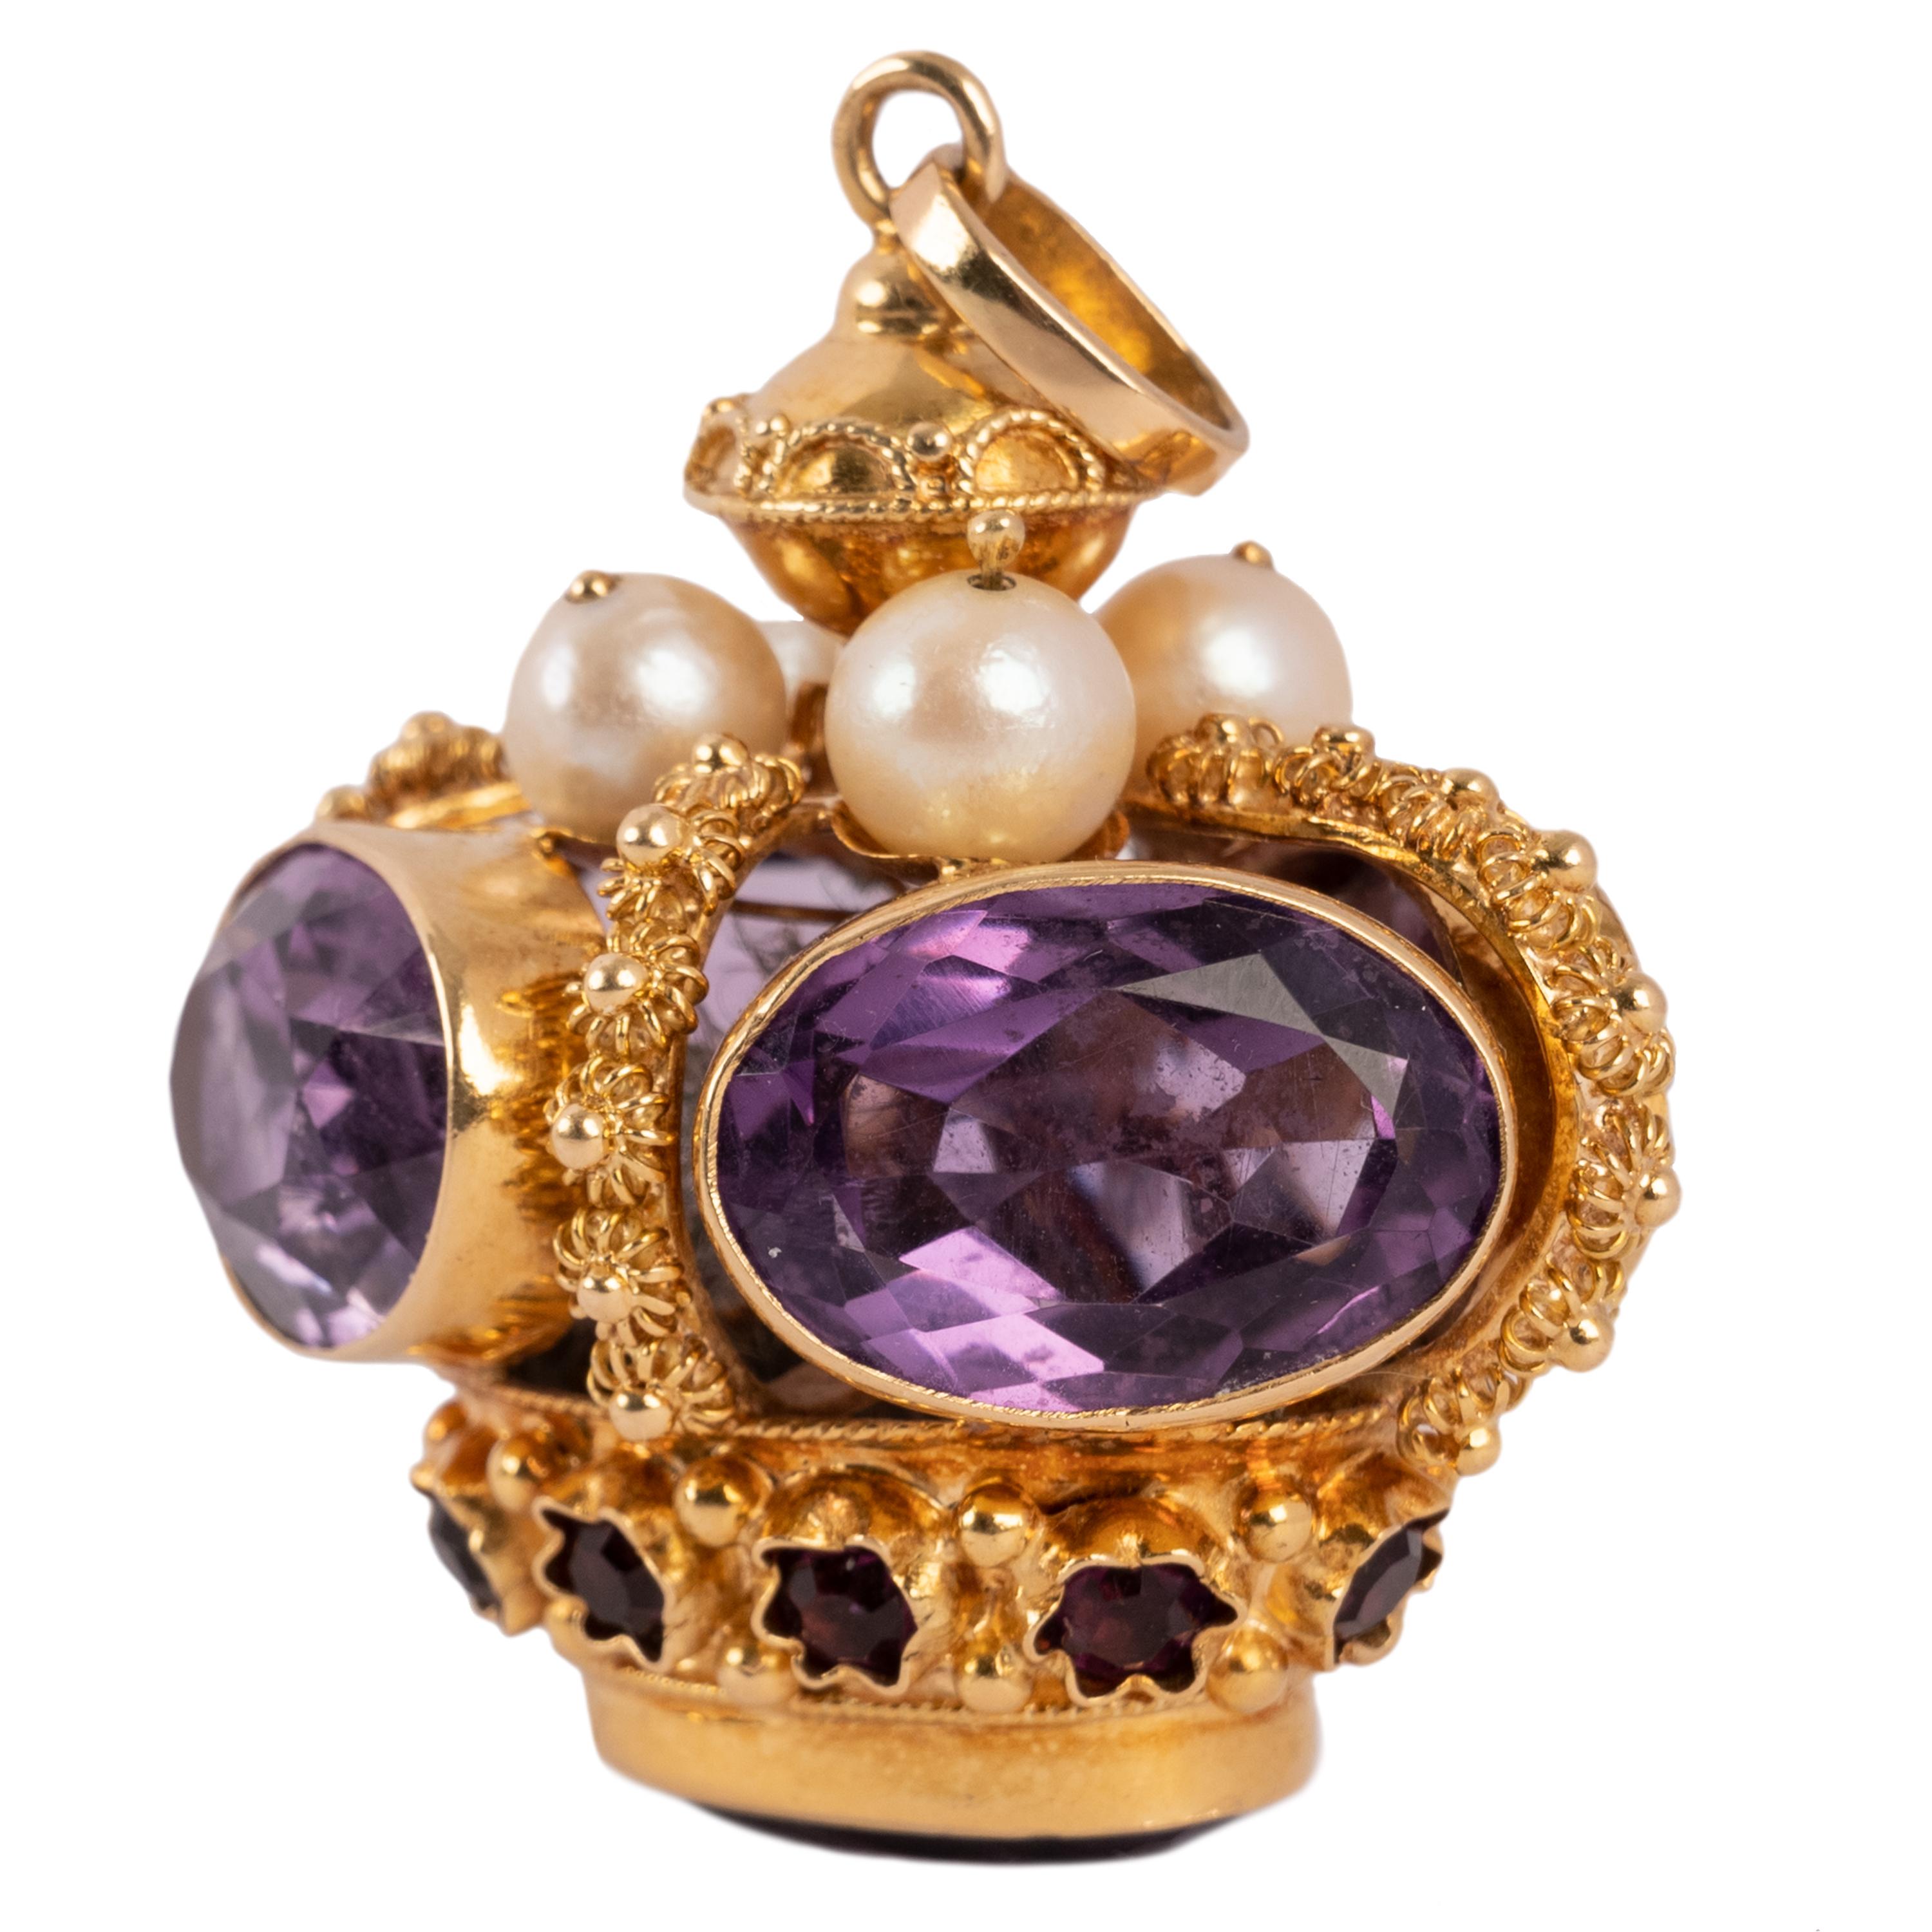 A fine and substantial 18k gold, amethyst and natural pearl pendant.
The pendant modelled in gold as a crown is of the very highest quality, the gem is set with five imposing oval faceted amethysts, each around 7 carats in size and with a gallery of